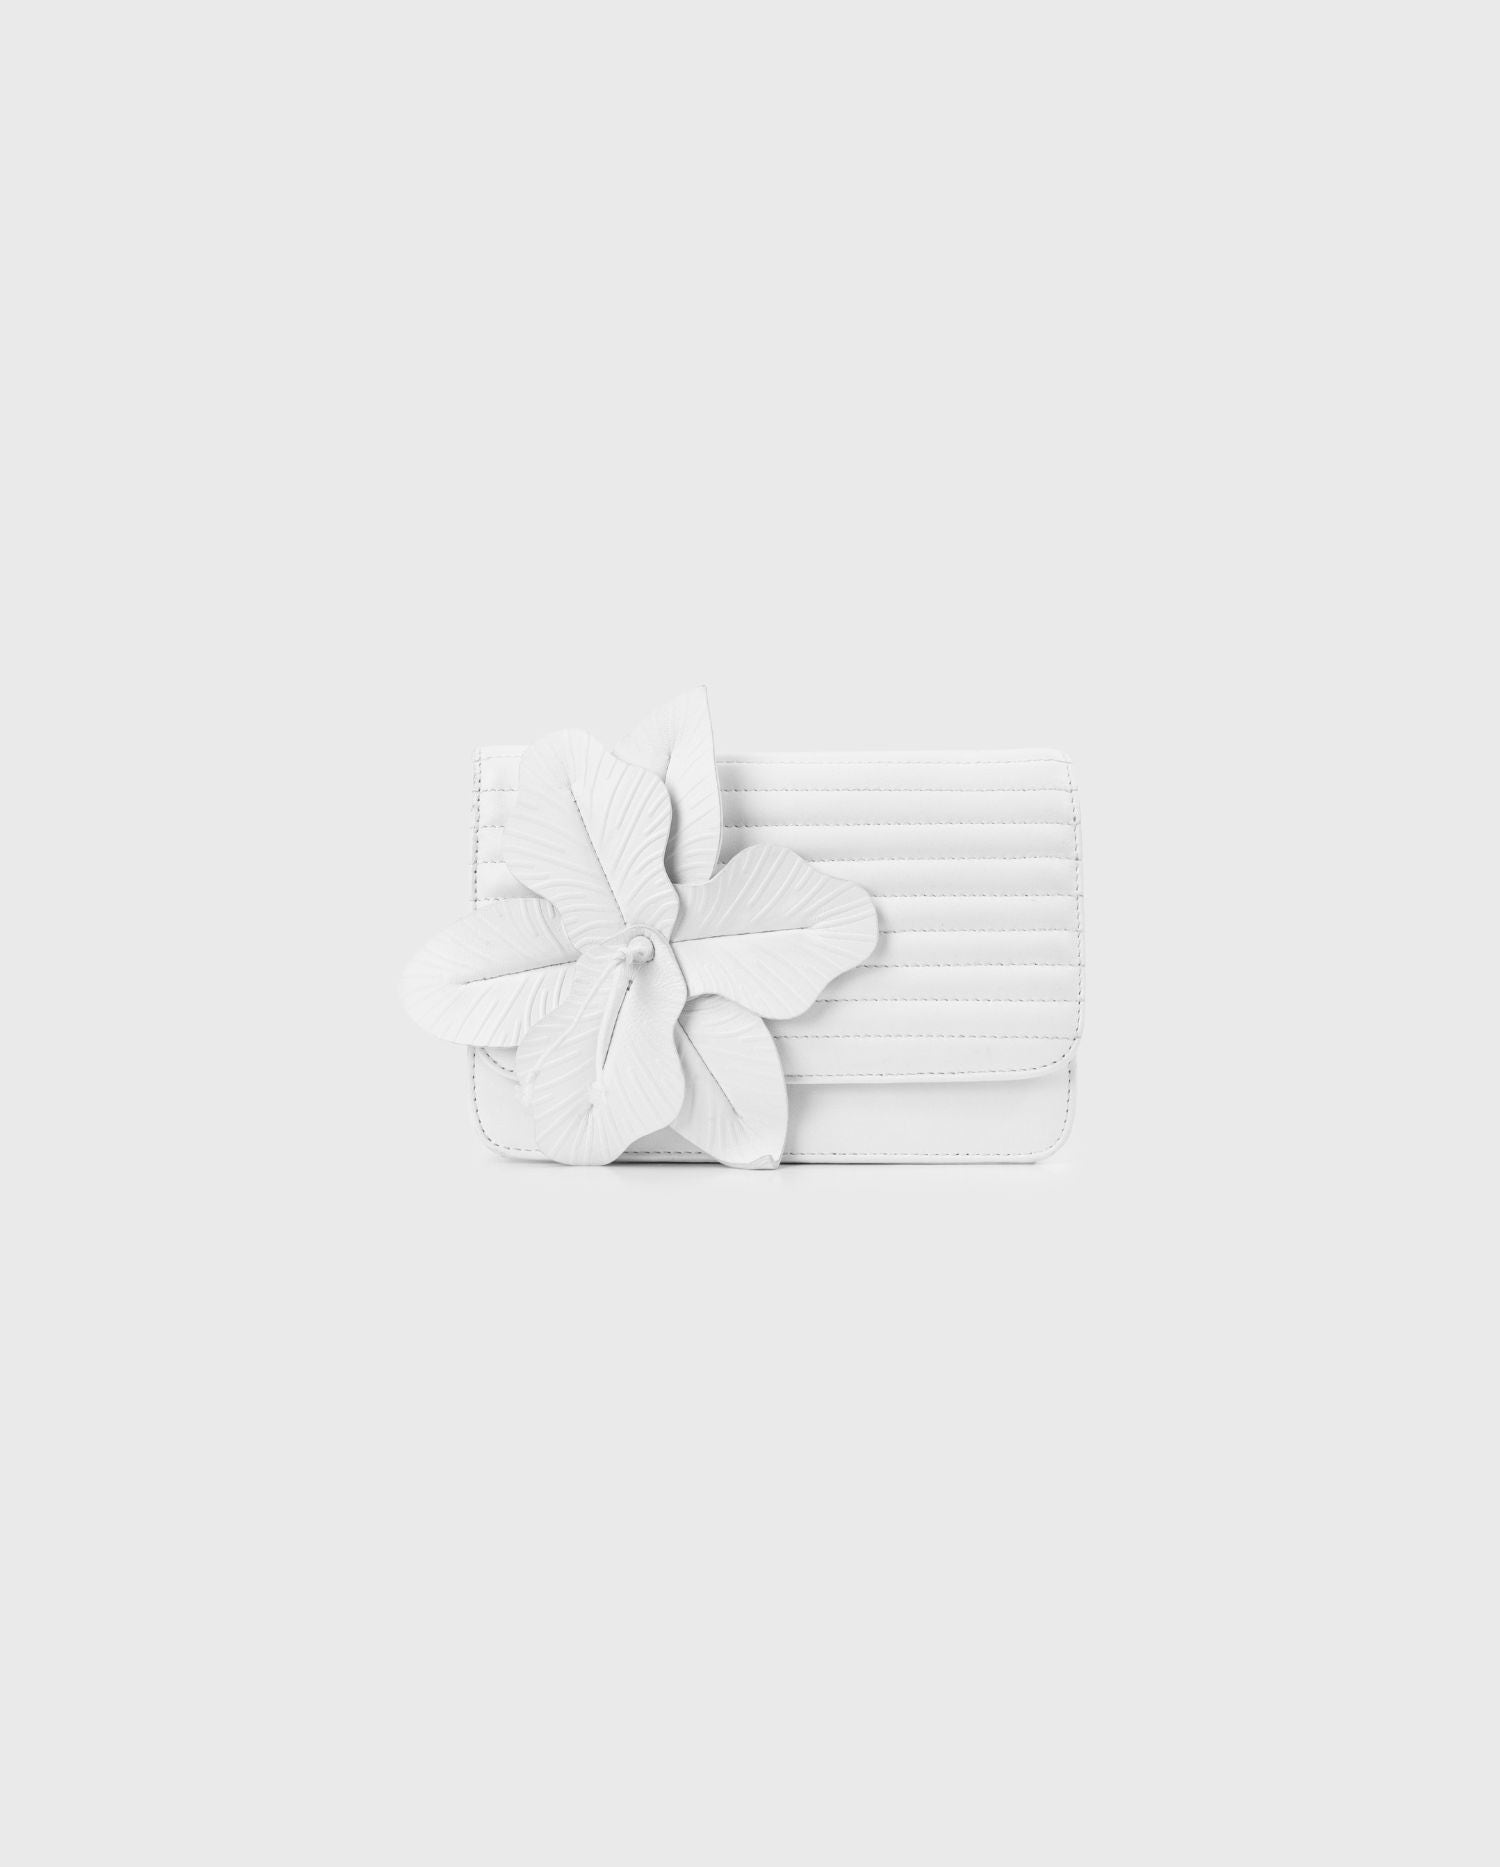 Shop the White Nicki Leather Handbag With a Large Flower from designer Anne Fontaine